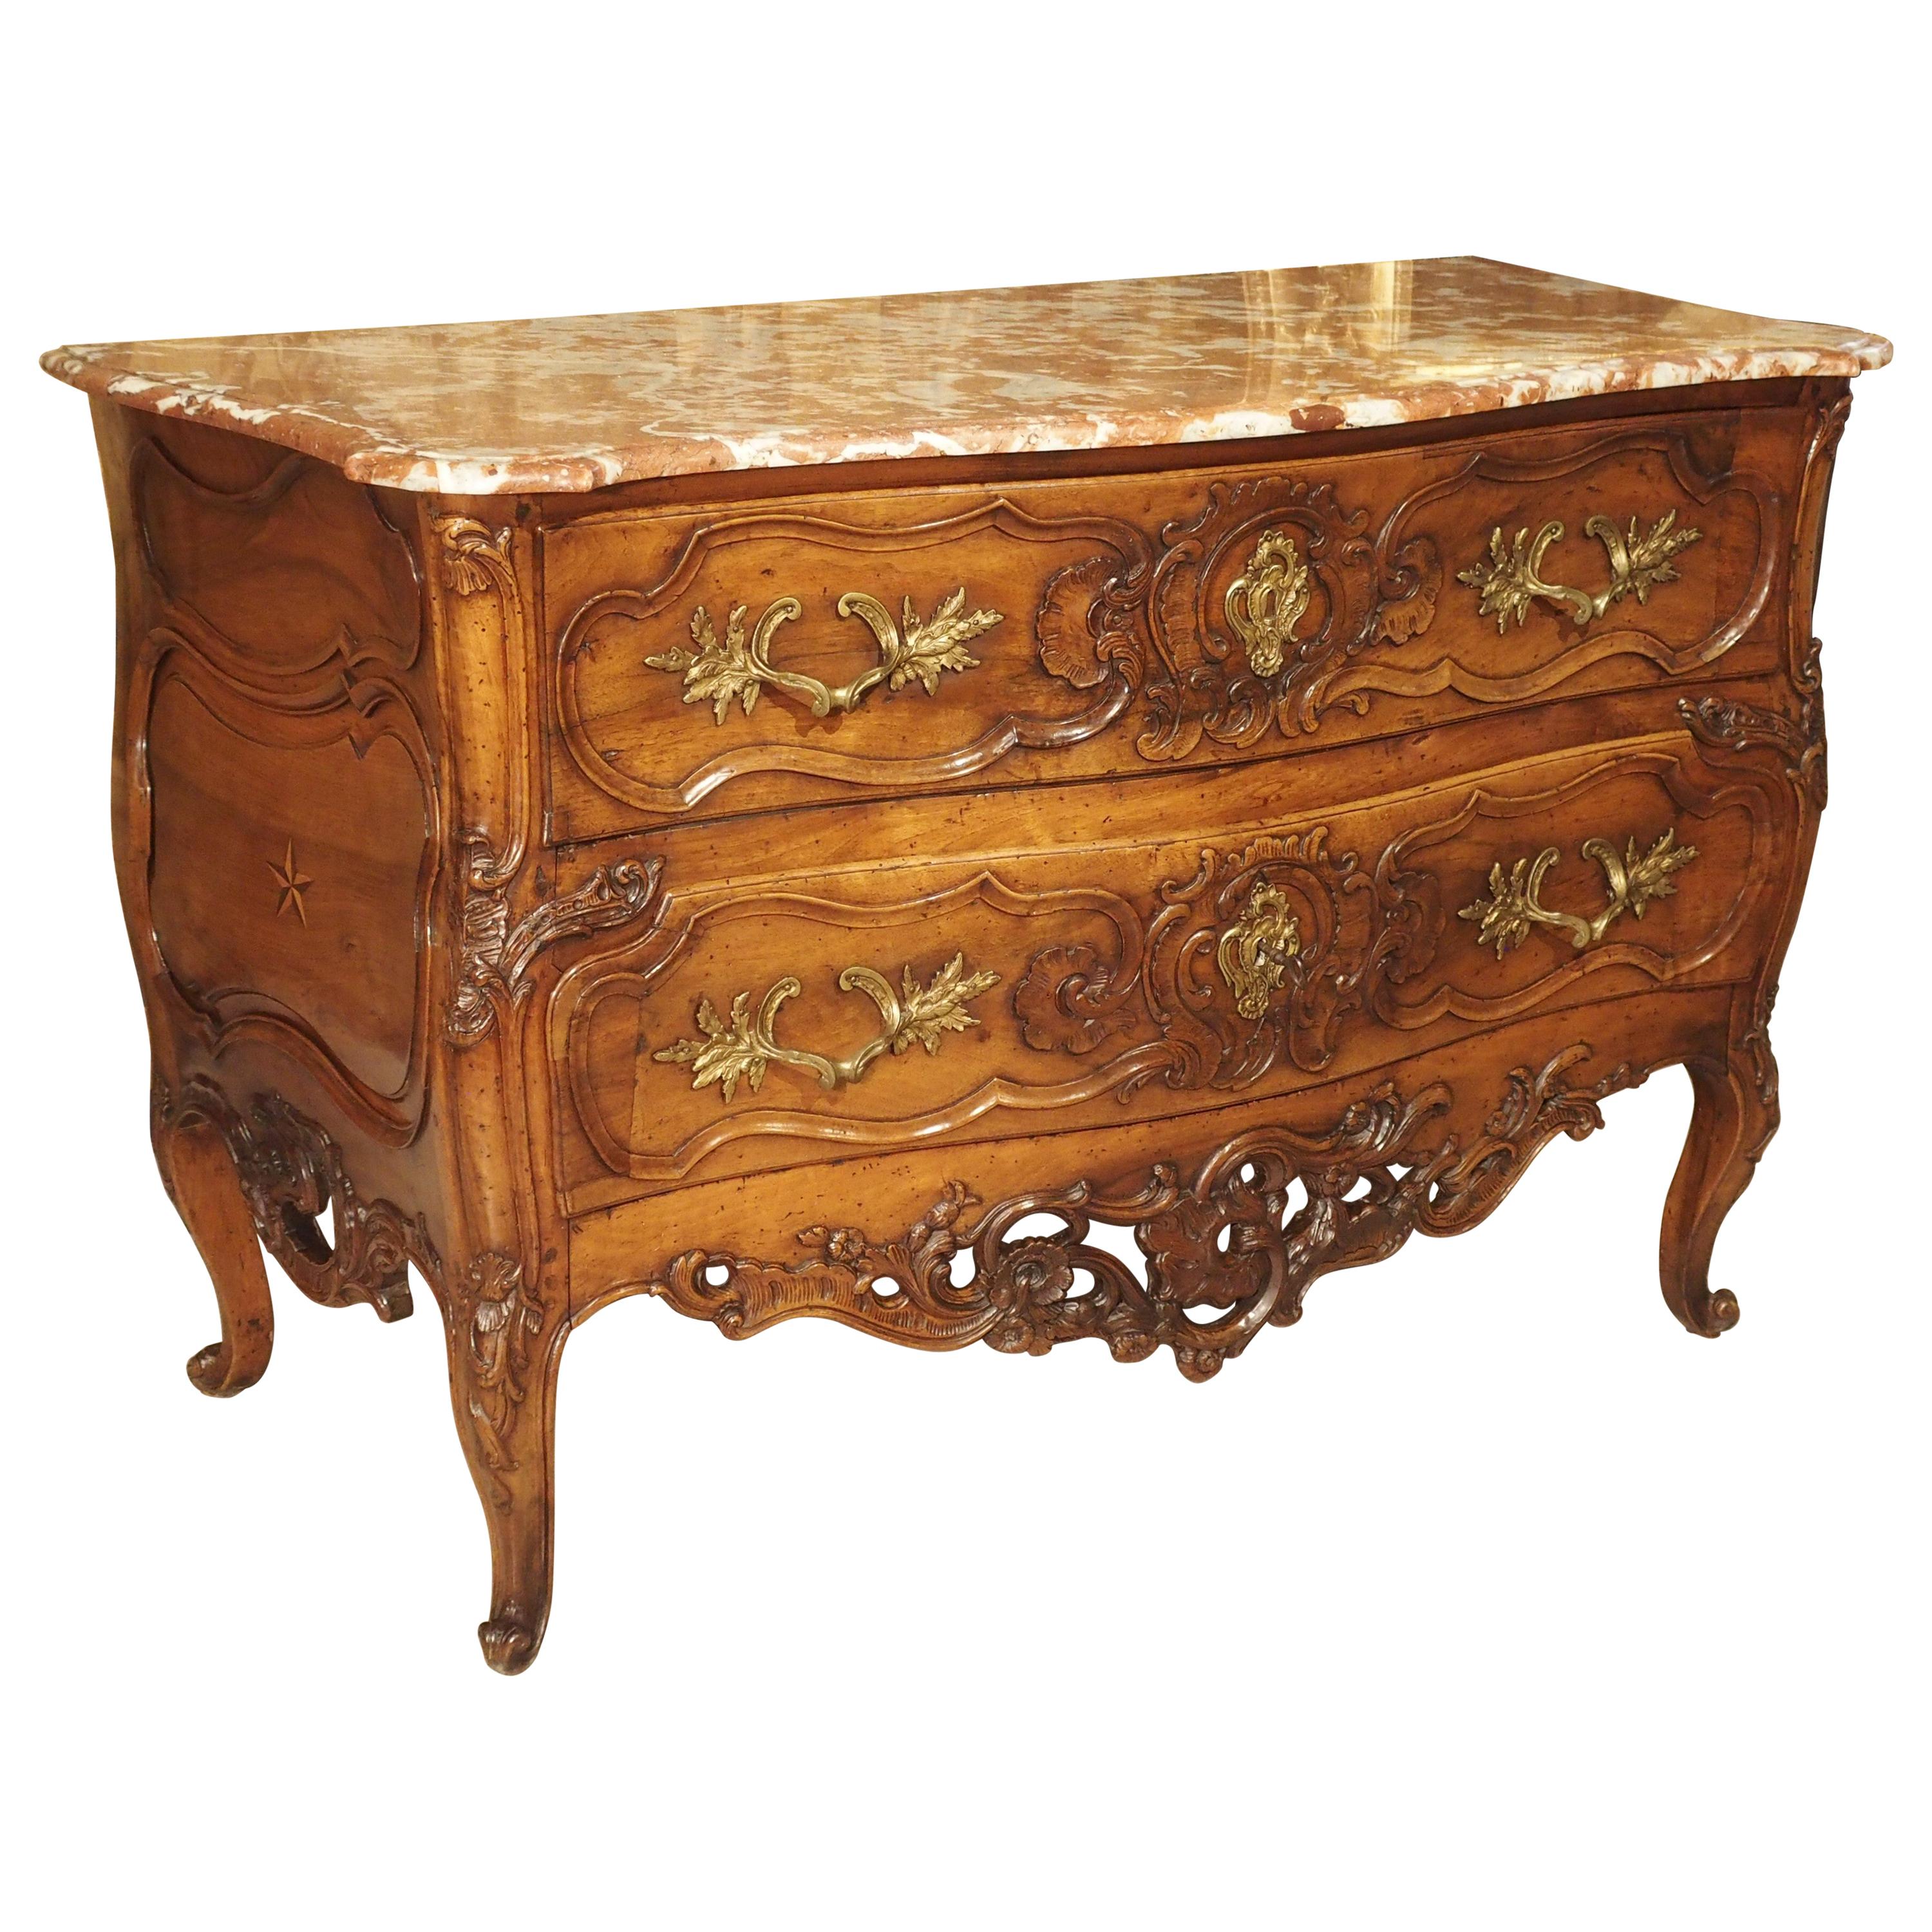 Period Louis XV Walnut Wood Commode �‘Sauteuse’ from Nimes, France, circa 1740